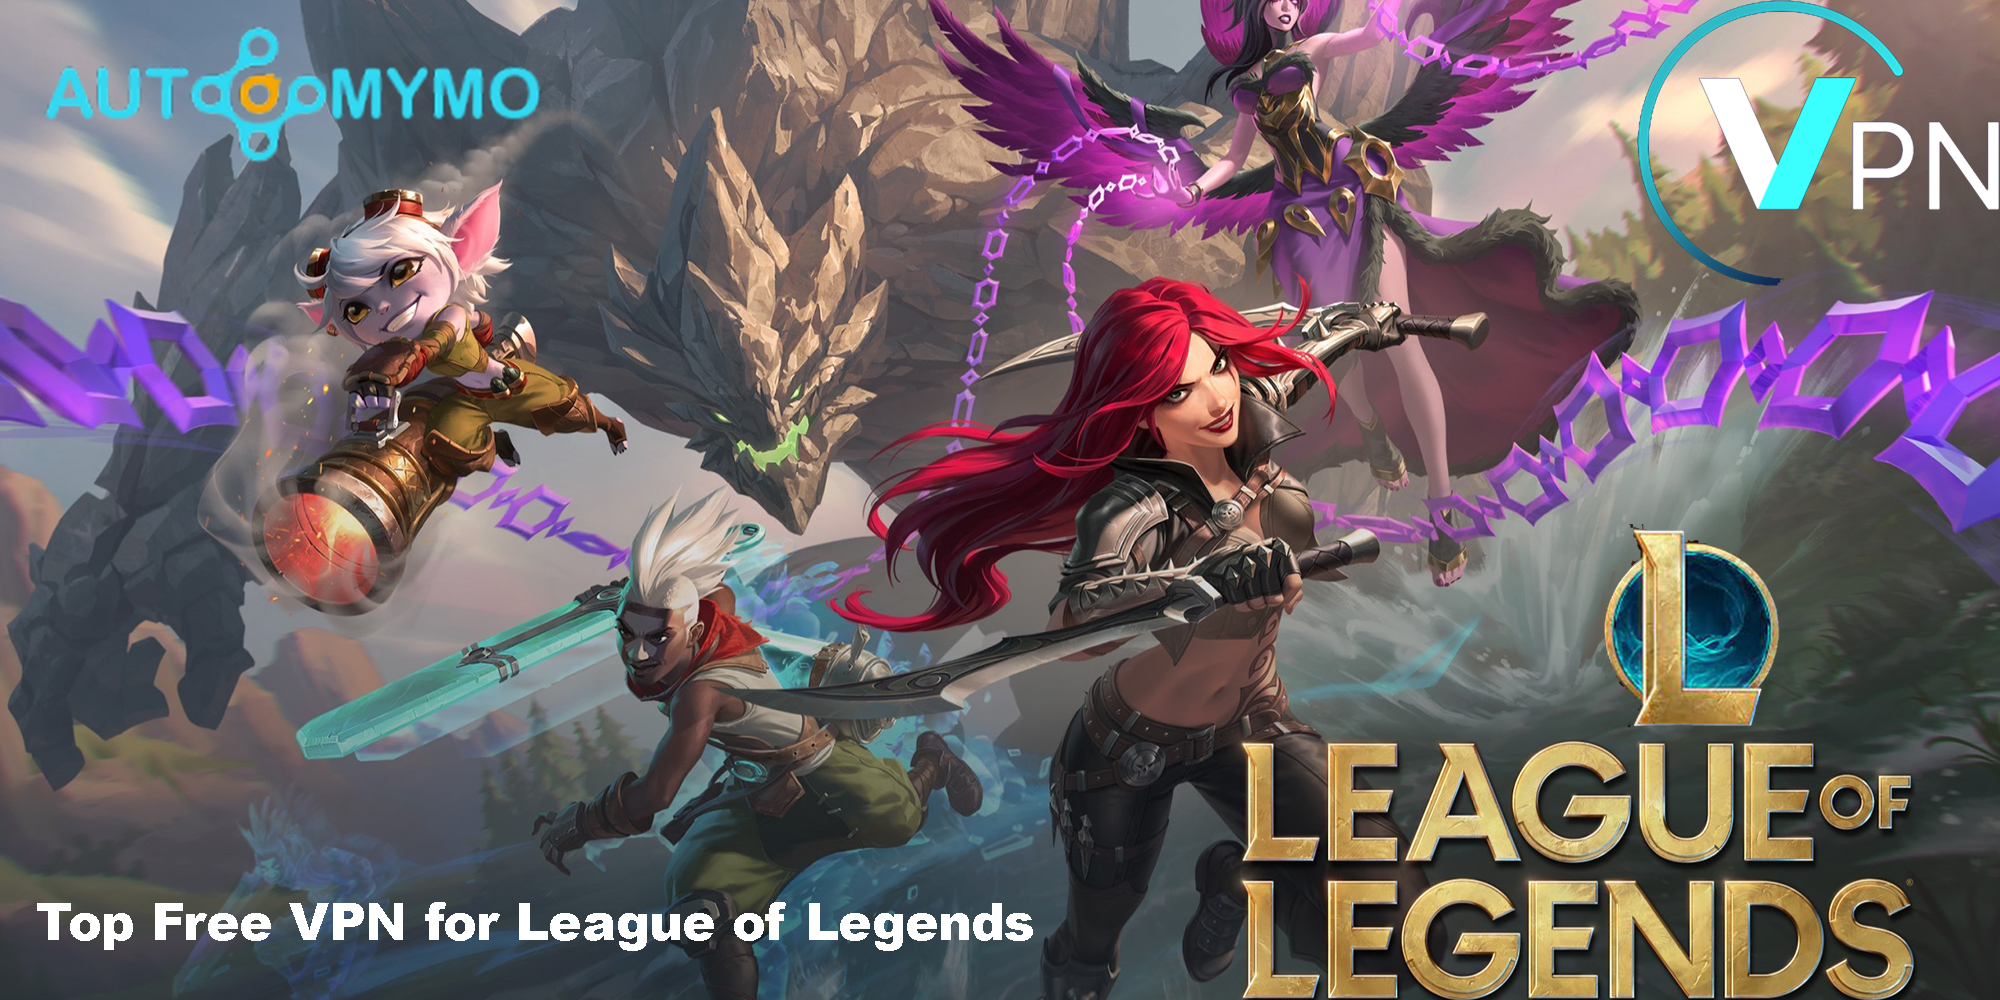 Top Free VPN for League of Legends